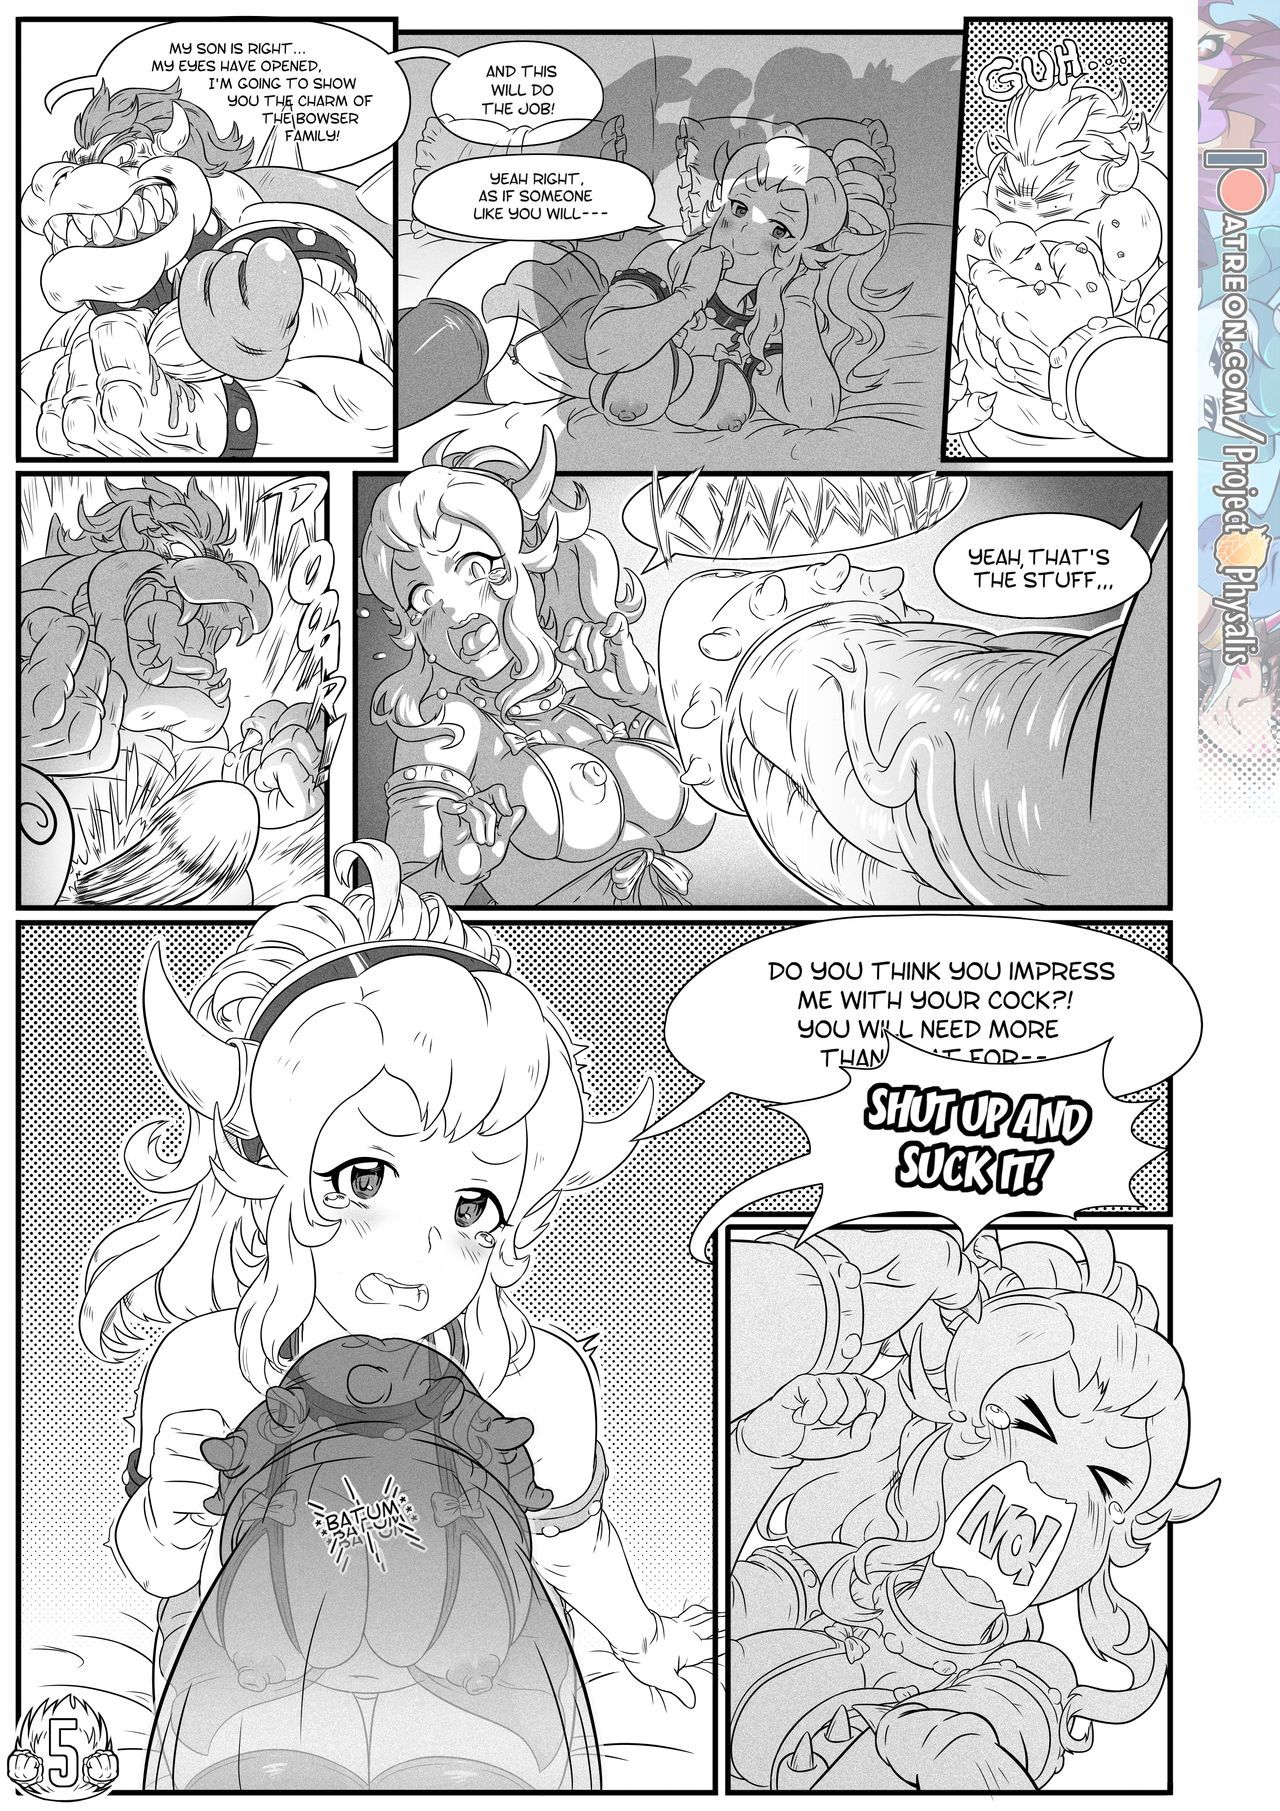 [Project physalis] Princess Conquest (Super Mario Bros.)(Ongoing) 6